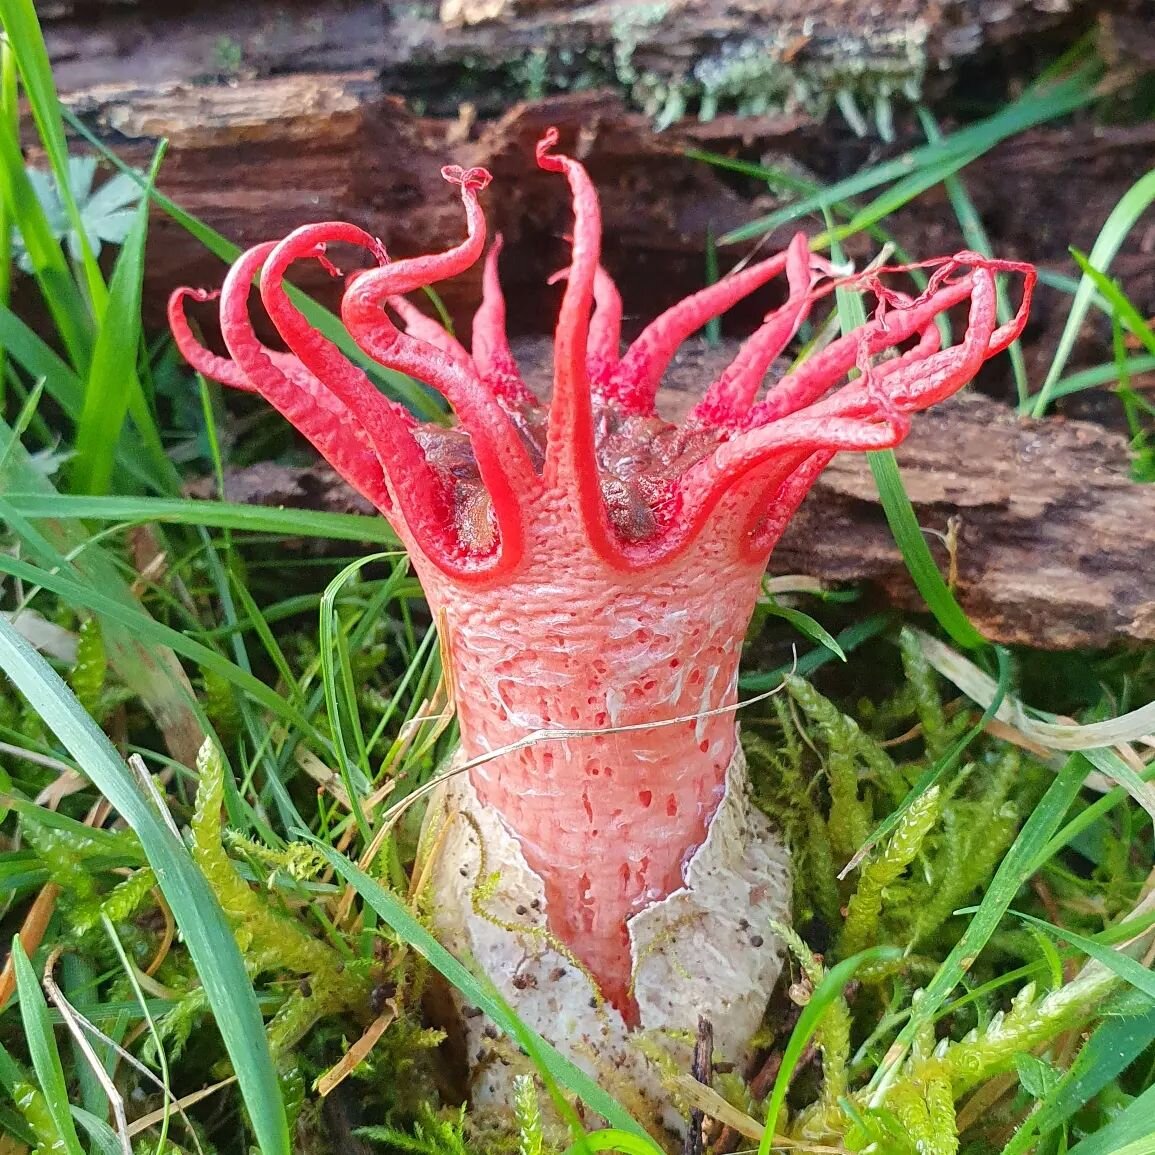 Asero&euml; rubra. One of the more unusual Australian fungi. Also known as Anemone Stinkhorn, Sea Anemone Fungus, and Starfish Fungus.

.

It was the first native Australian fungus to be formally described. It was first collected by european botanist